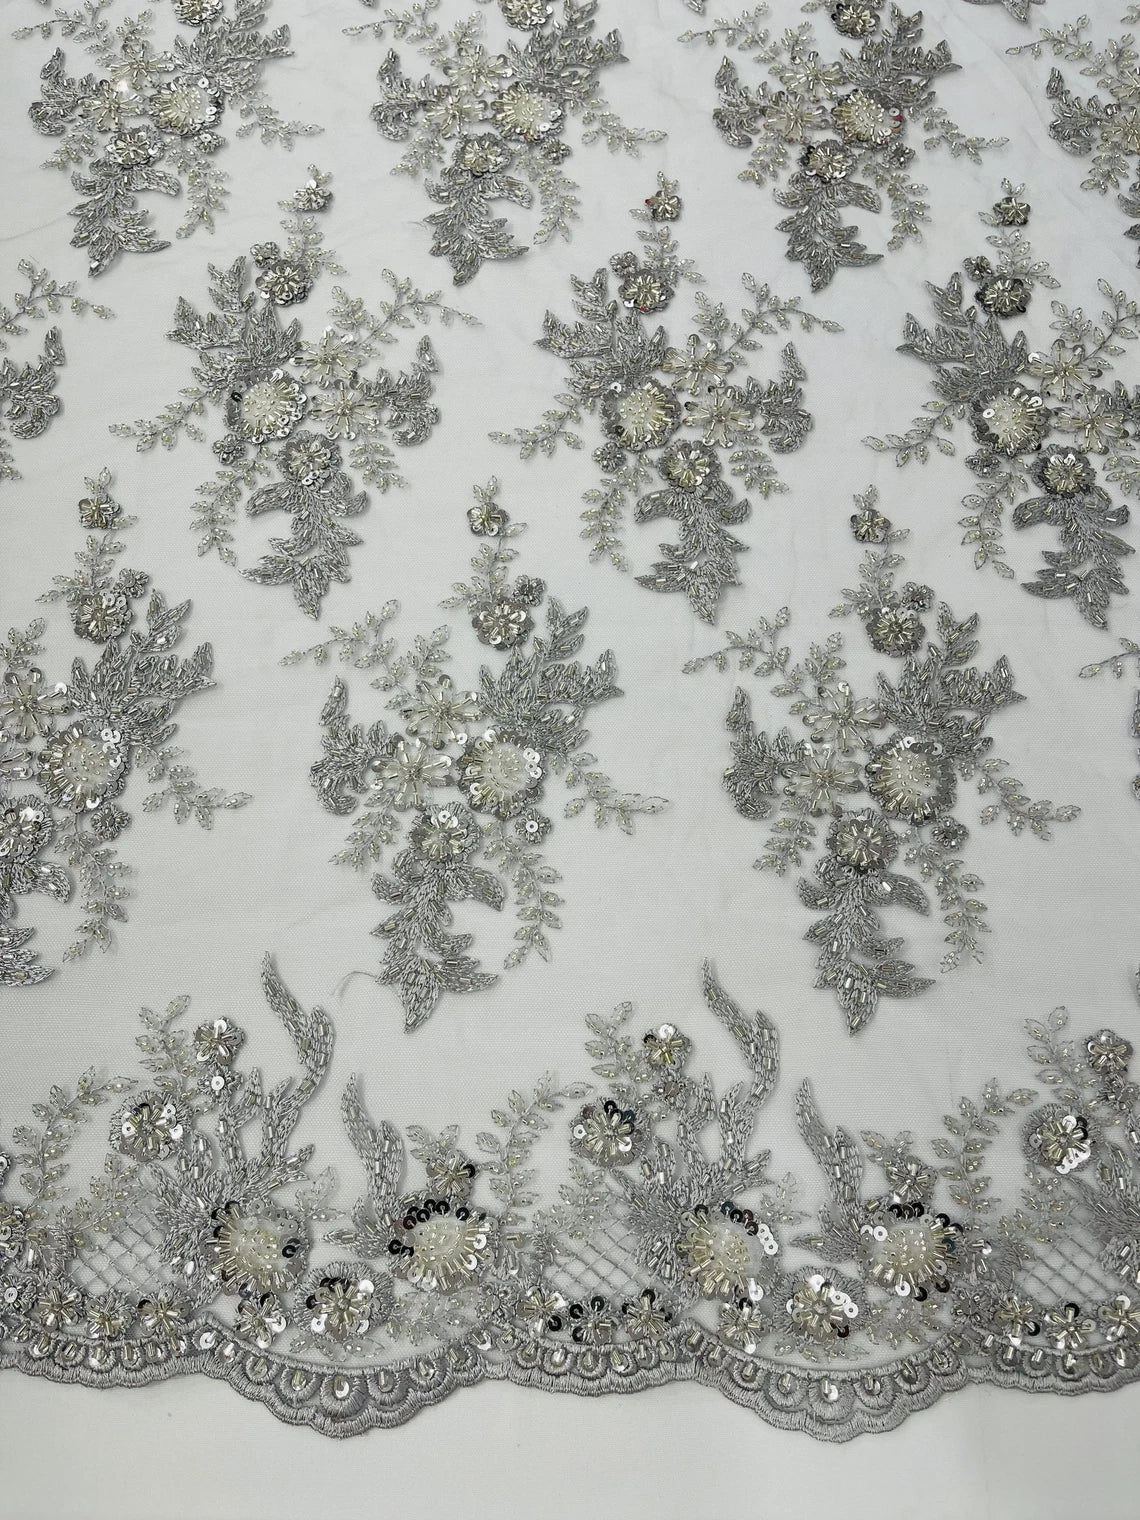 Floral Leaf Bead Sequins Fabric - Silver - Embroidered Flower and Leaves Design Fabric By Yard